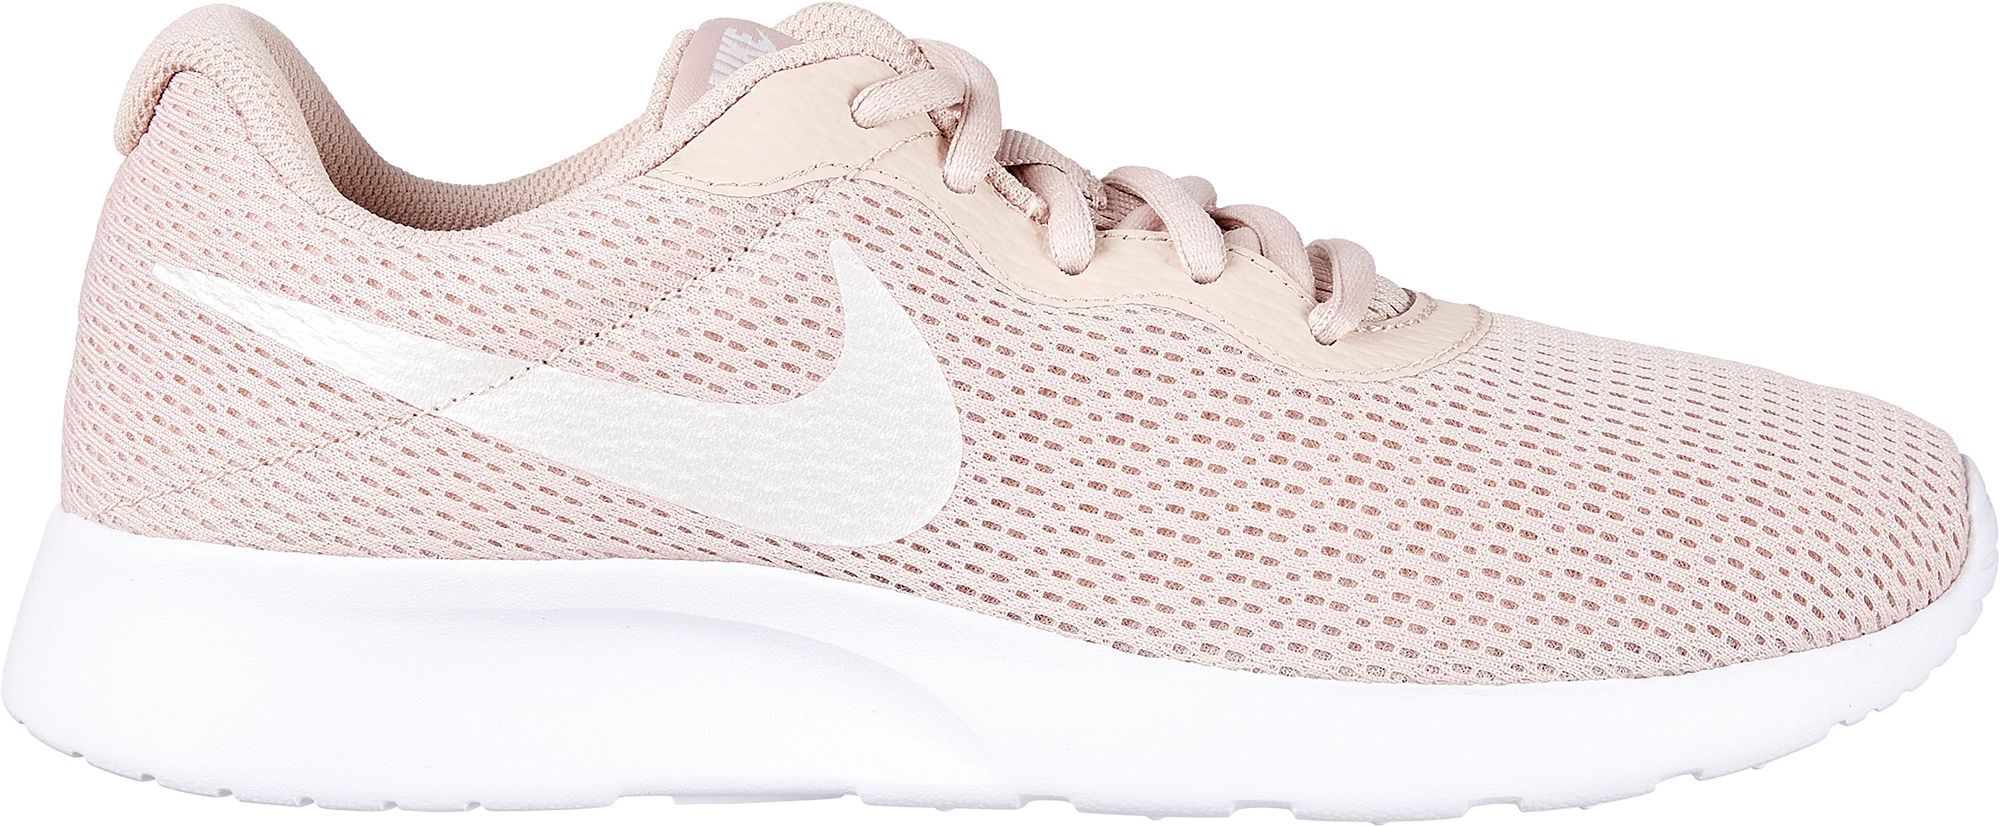 nike rose gold shoes womens